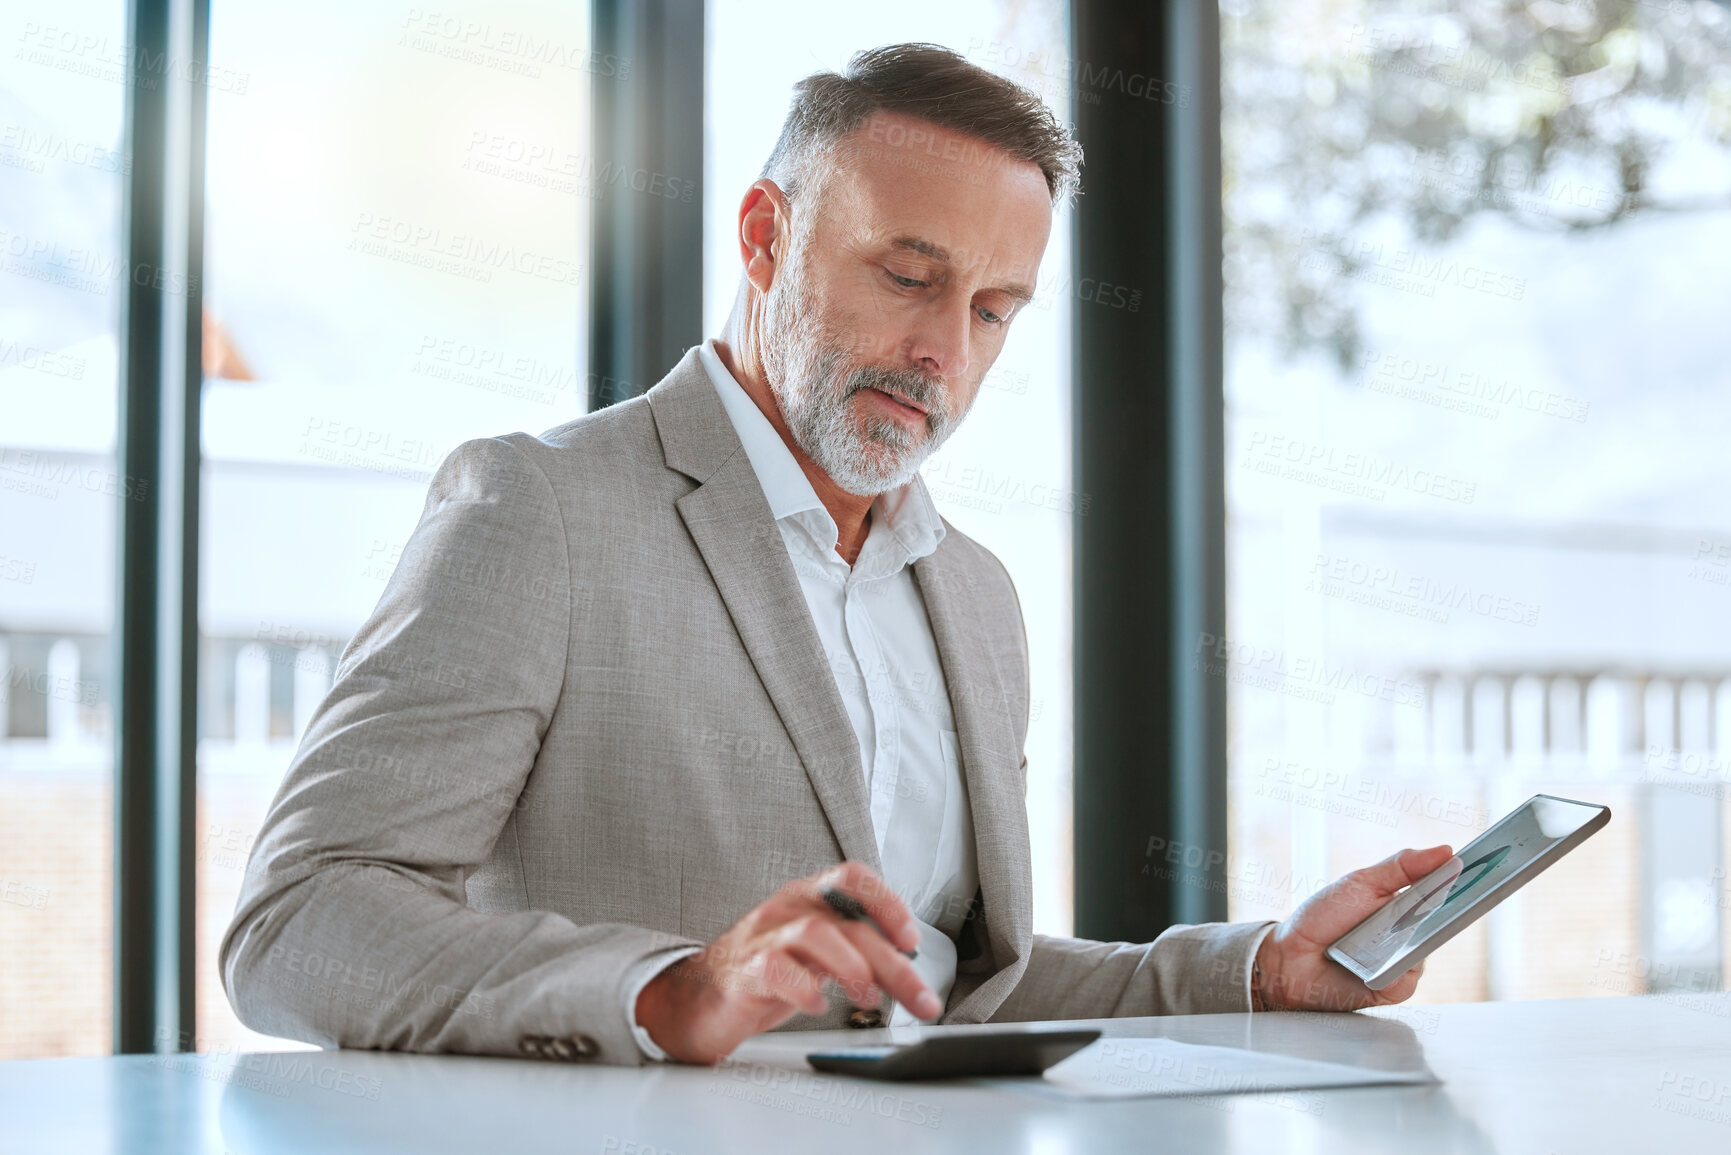 Buy stock photo Shot of a. mature man using a tablet and a calculator in a office